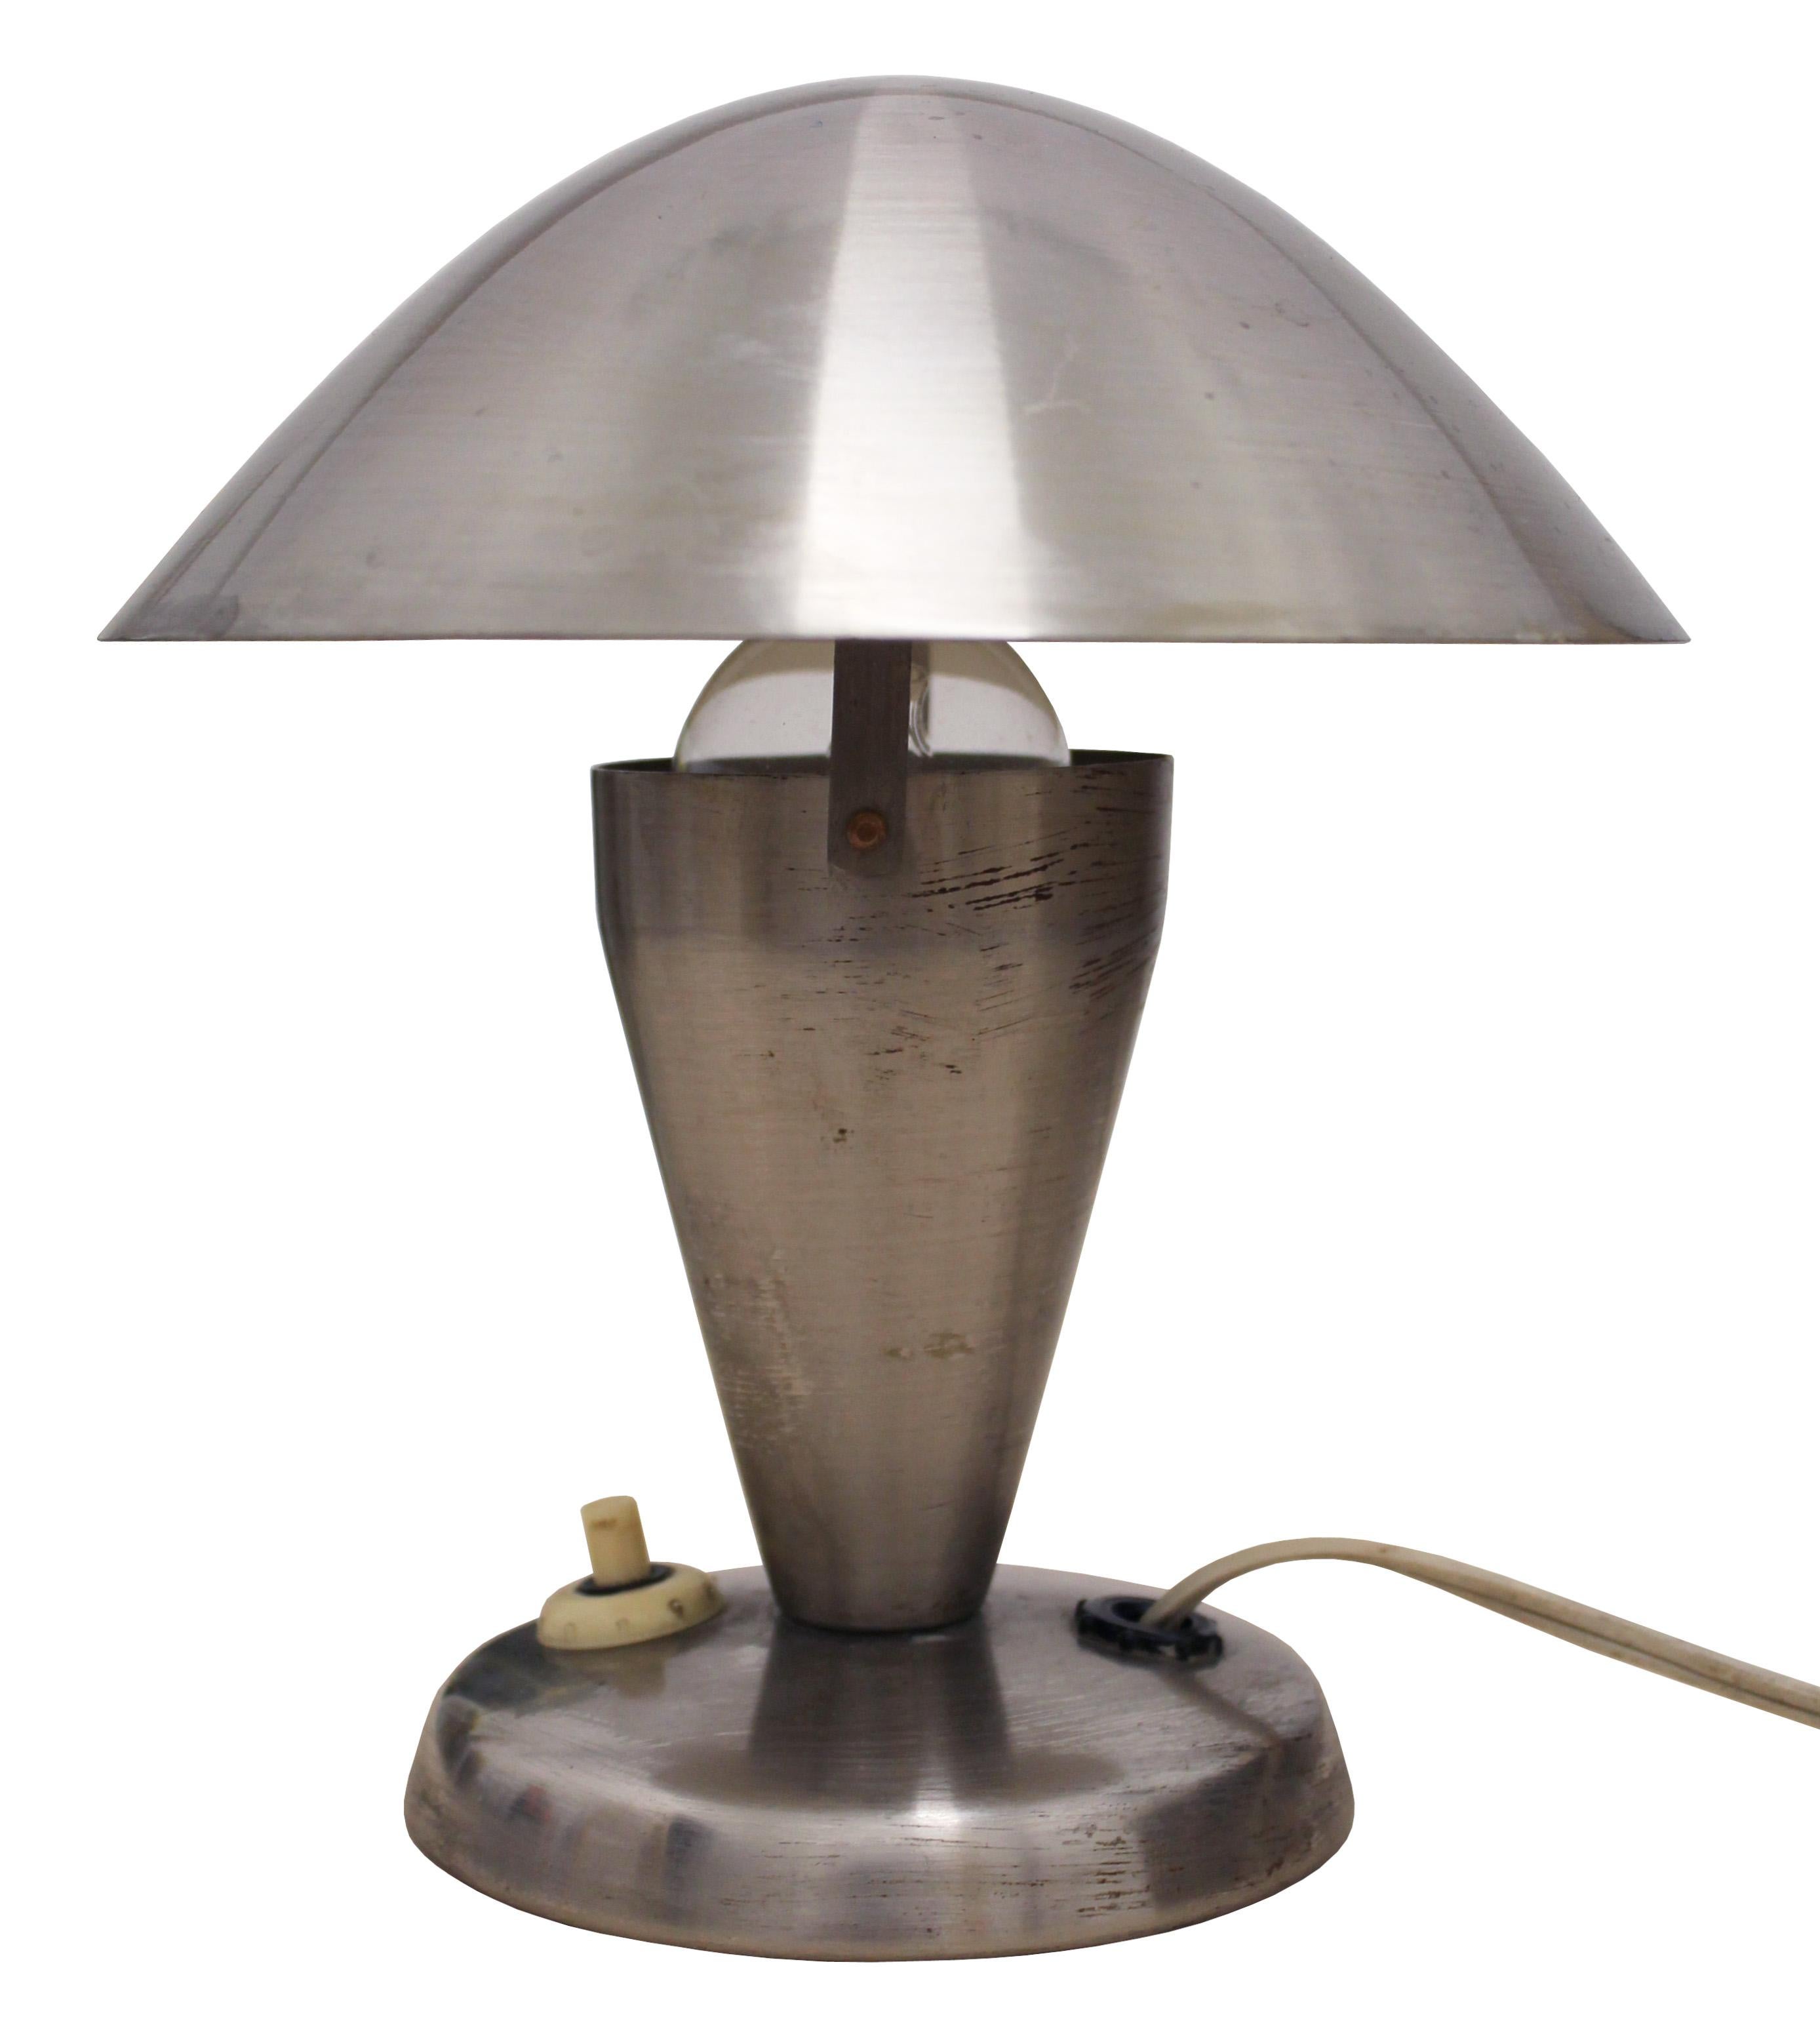 A pair of steel midcentury table lamps by the iconic Czech lighting designer Josef Hurka. These lights were produced in the early 1950s by the Napako Company and their design is strongly influenced by the pre-war modernist aesthetic. The lamp shades